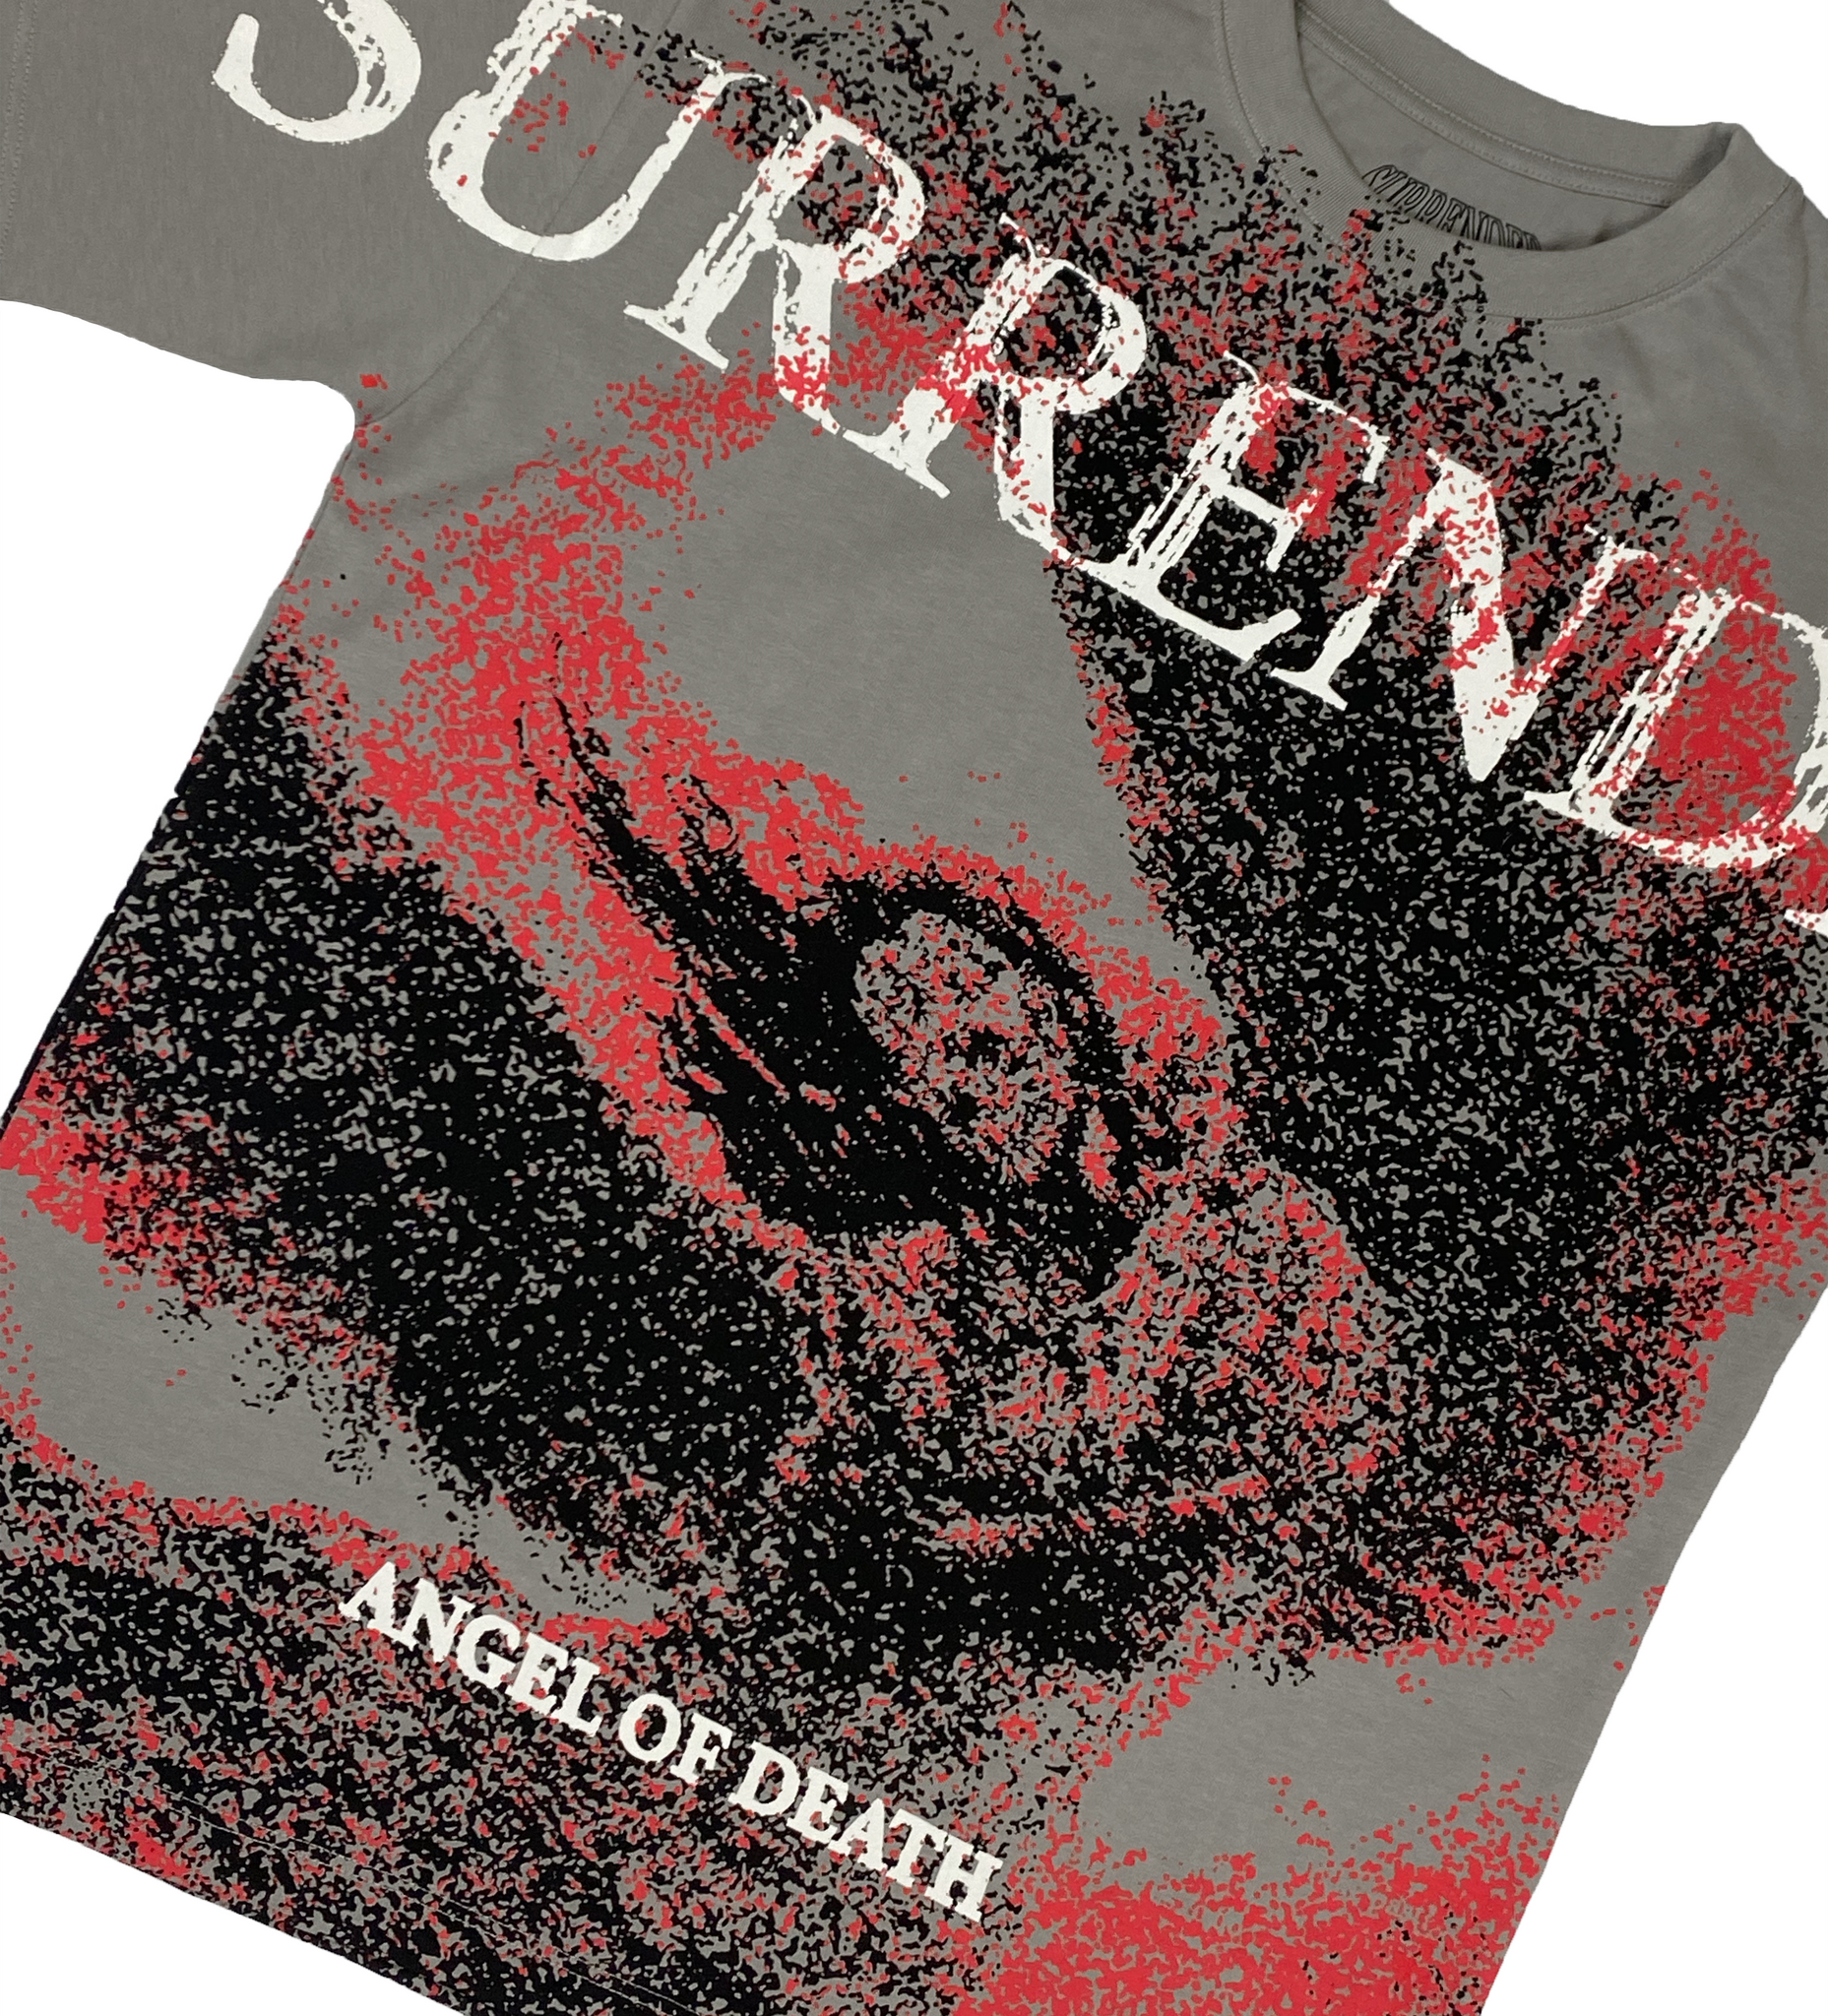 Angels Of Death T-Shirts for Sale